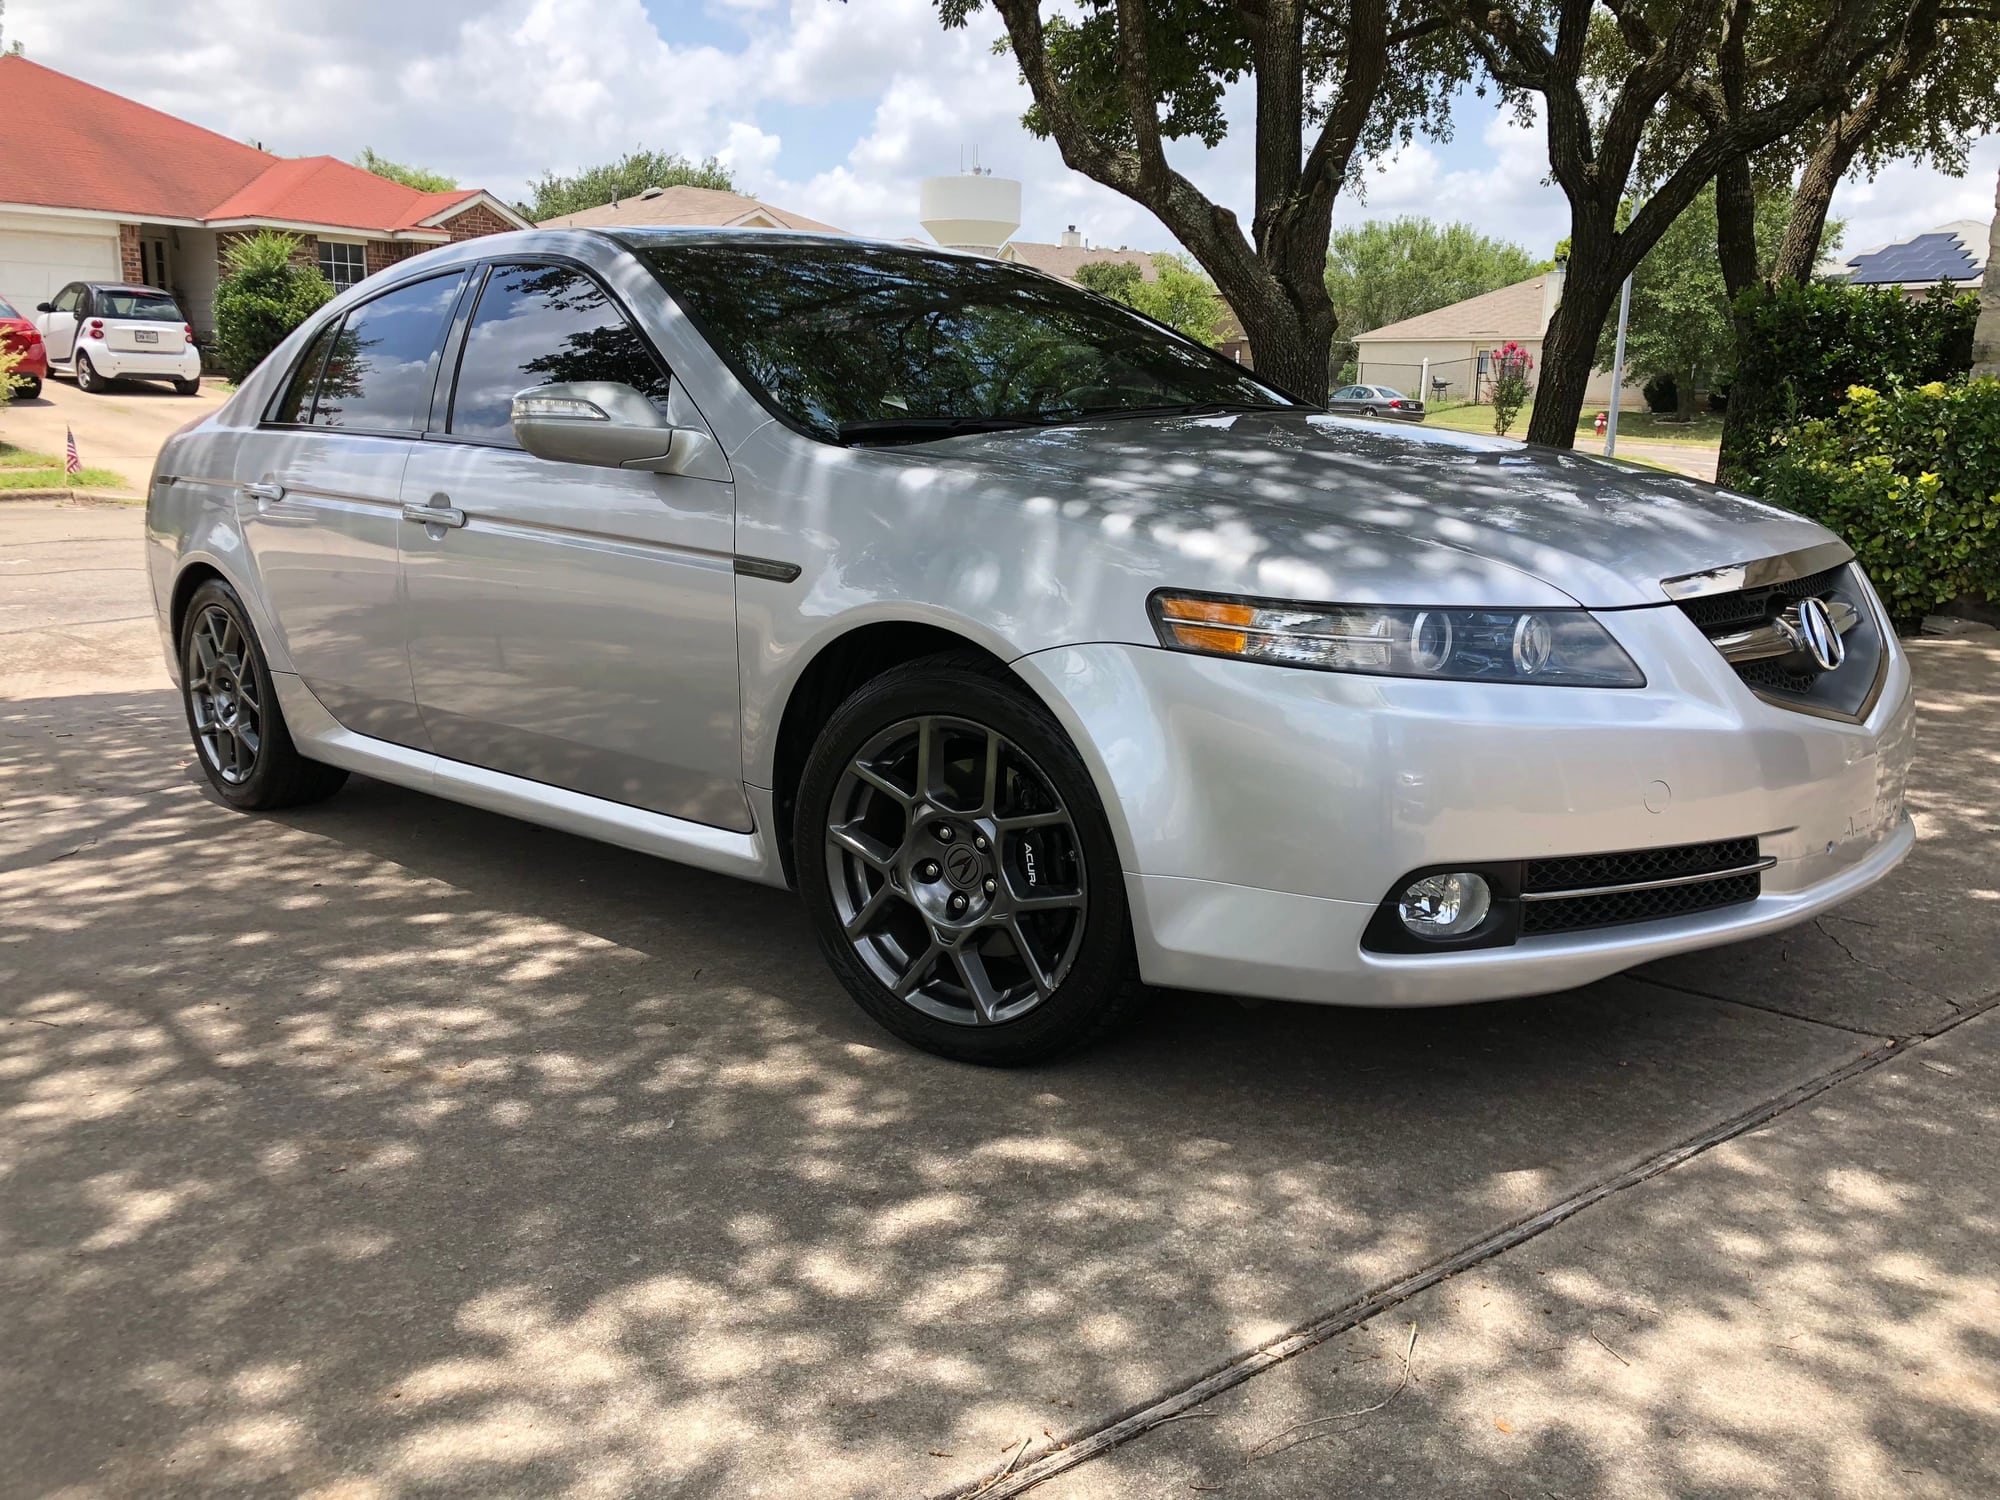 2007 Acura TL - FS: Texas Owned 2007 Acura TL Type S - Used - VIN 19UUA76517A001187 - 98,900 Miles - 6 cyl - 2WD - Automatic - Sedan - Silver - Round Rock, TX 78664, United States